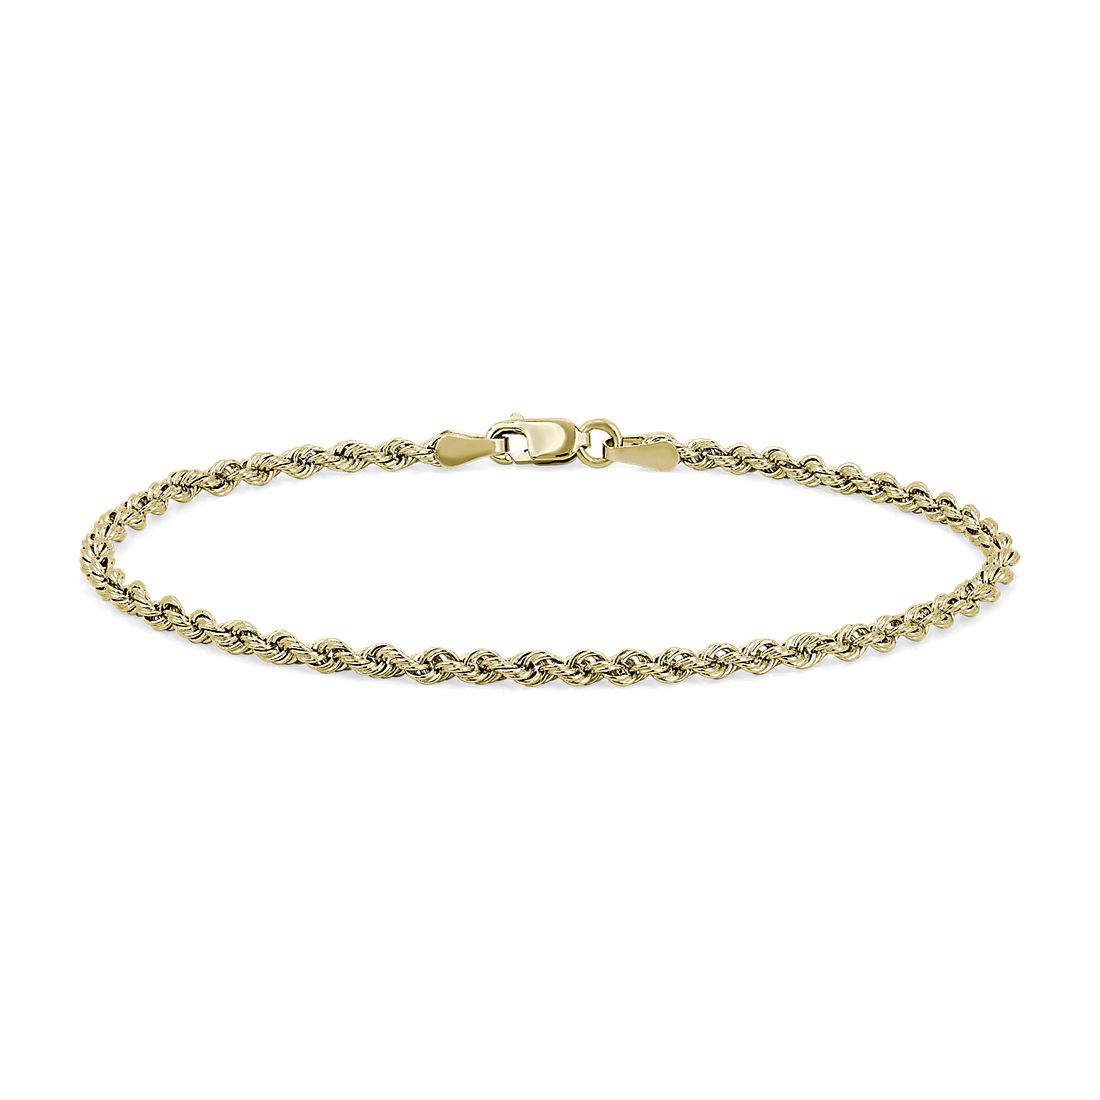 7" Rope Chain Bracelet in 14k Yellow Gold (2.5 mm)